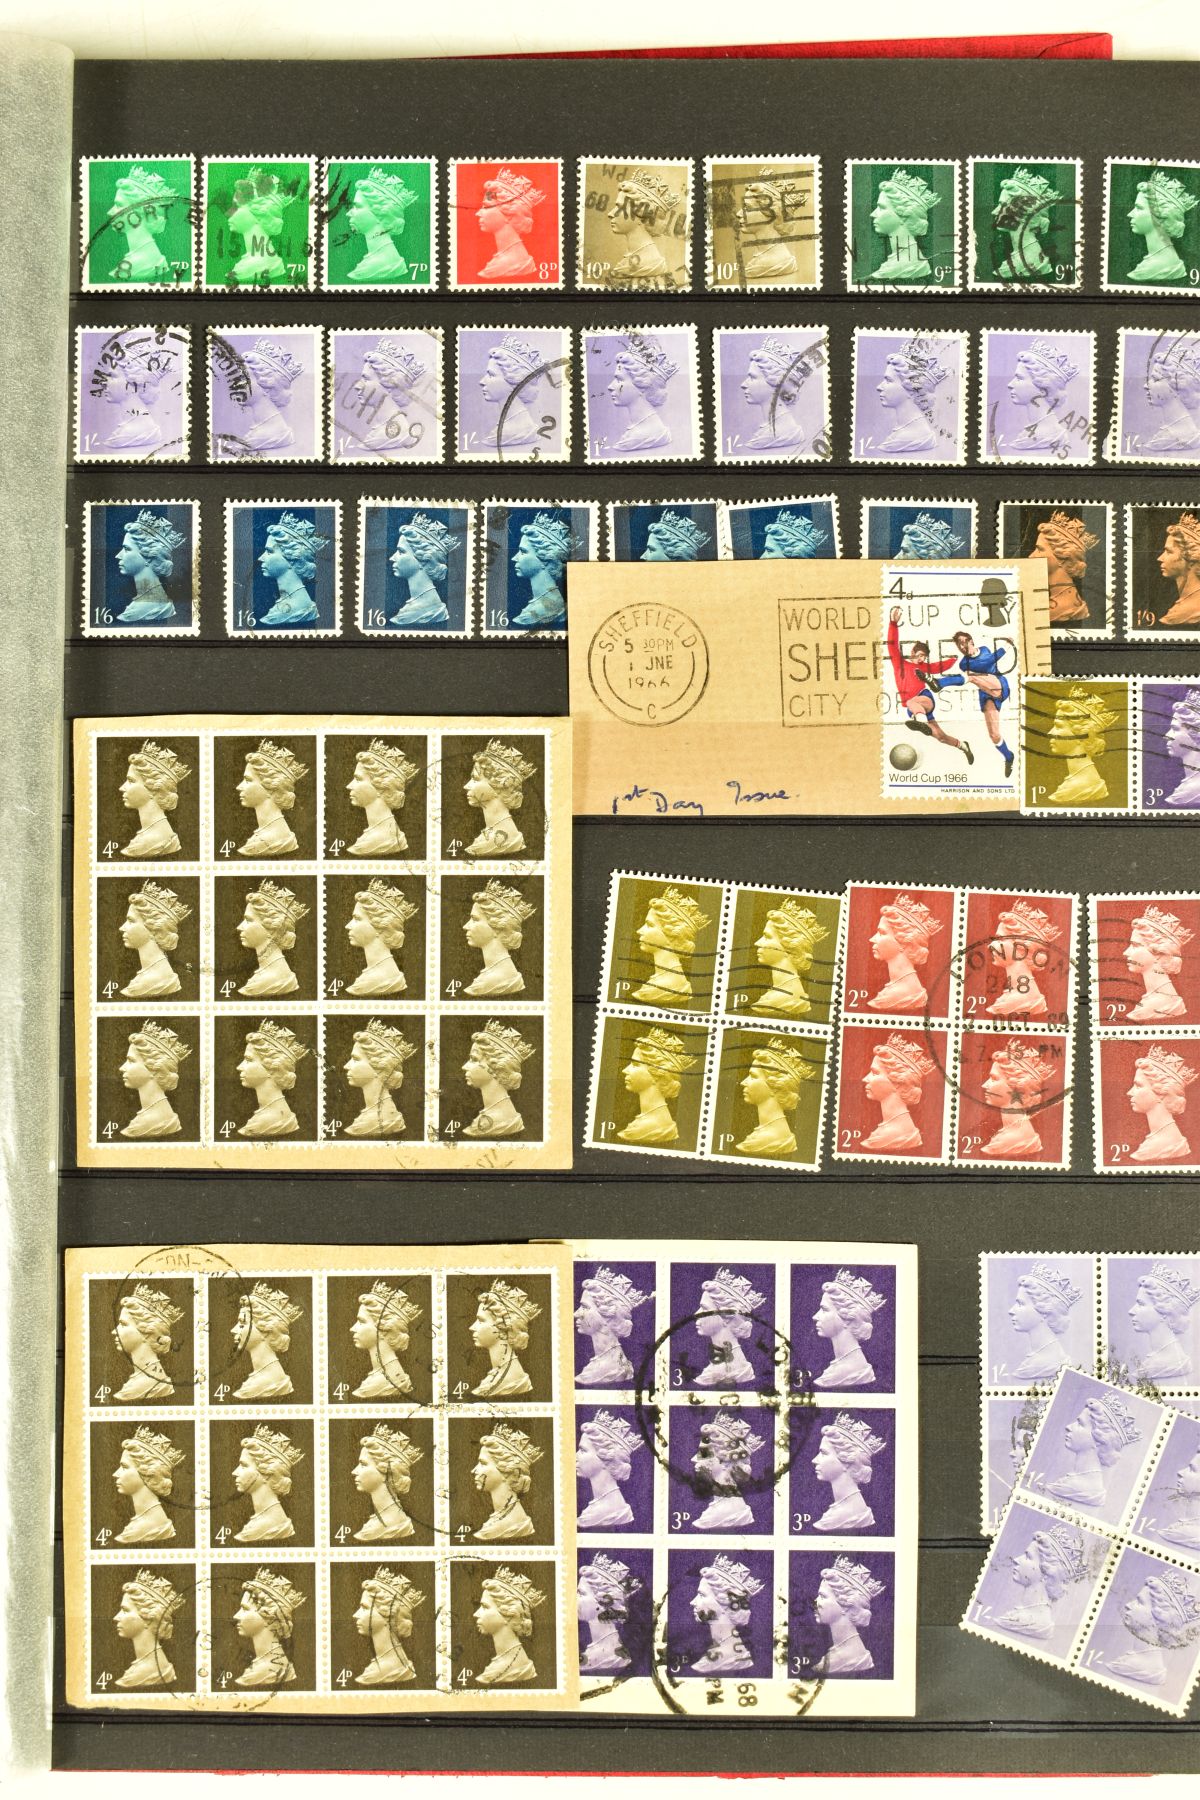 A LARGE BOX OF STAMPS WITH FIRST DAY COVERS, 1977 Commonwealth Silver Jubilee types, useful GB and - Image 3 of 10